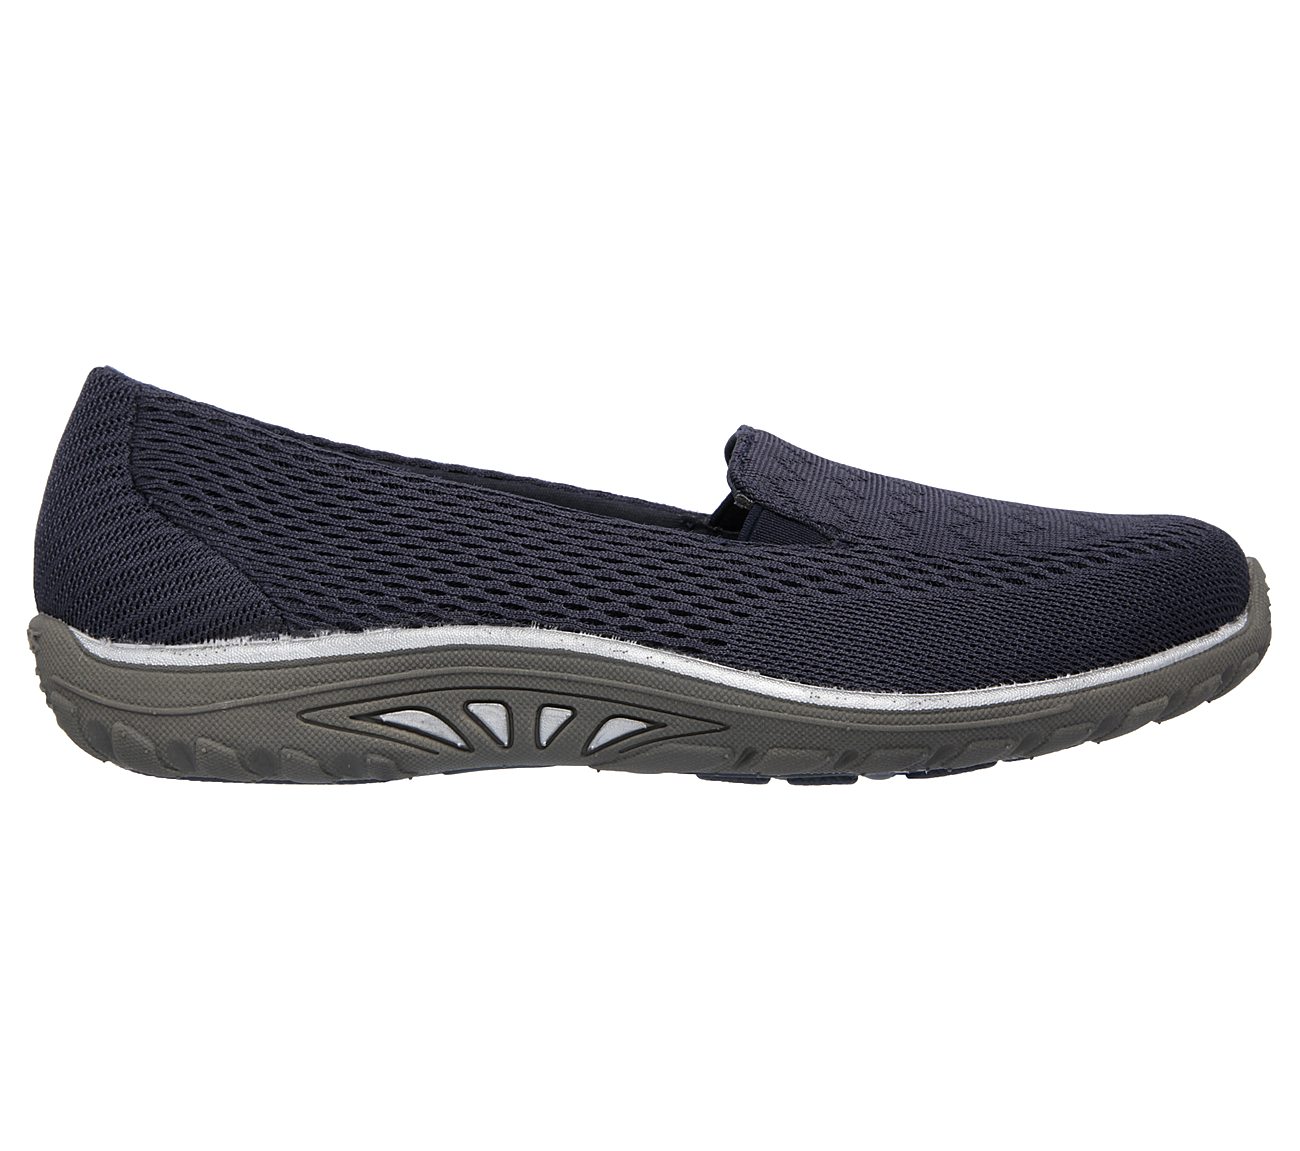 Buy SKECHERS Relaxed Fit: Reggae Fest - Willows Modern Comfort Shoes